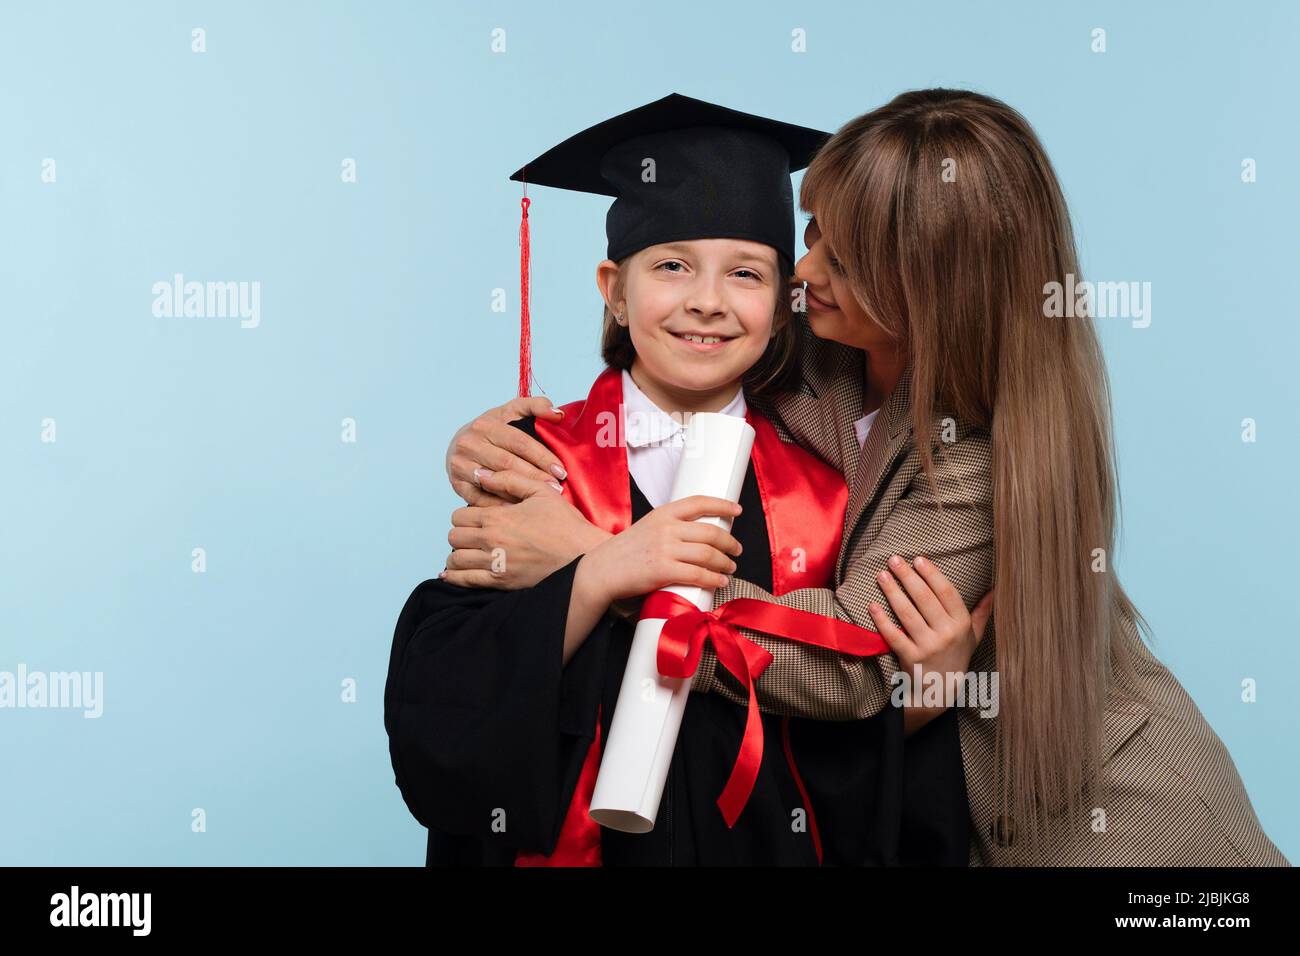 Little girl graduate celebrating graduation. Child wearing graduation cap and ceremony robe Holding Certificate. Mom hugs and congratulations daughter Stock Photo